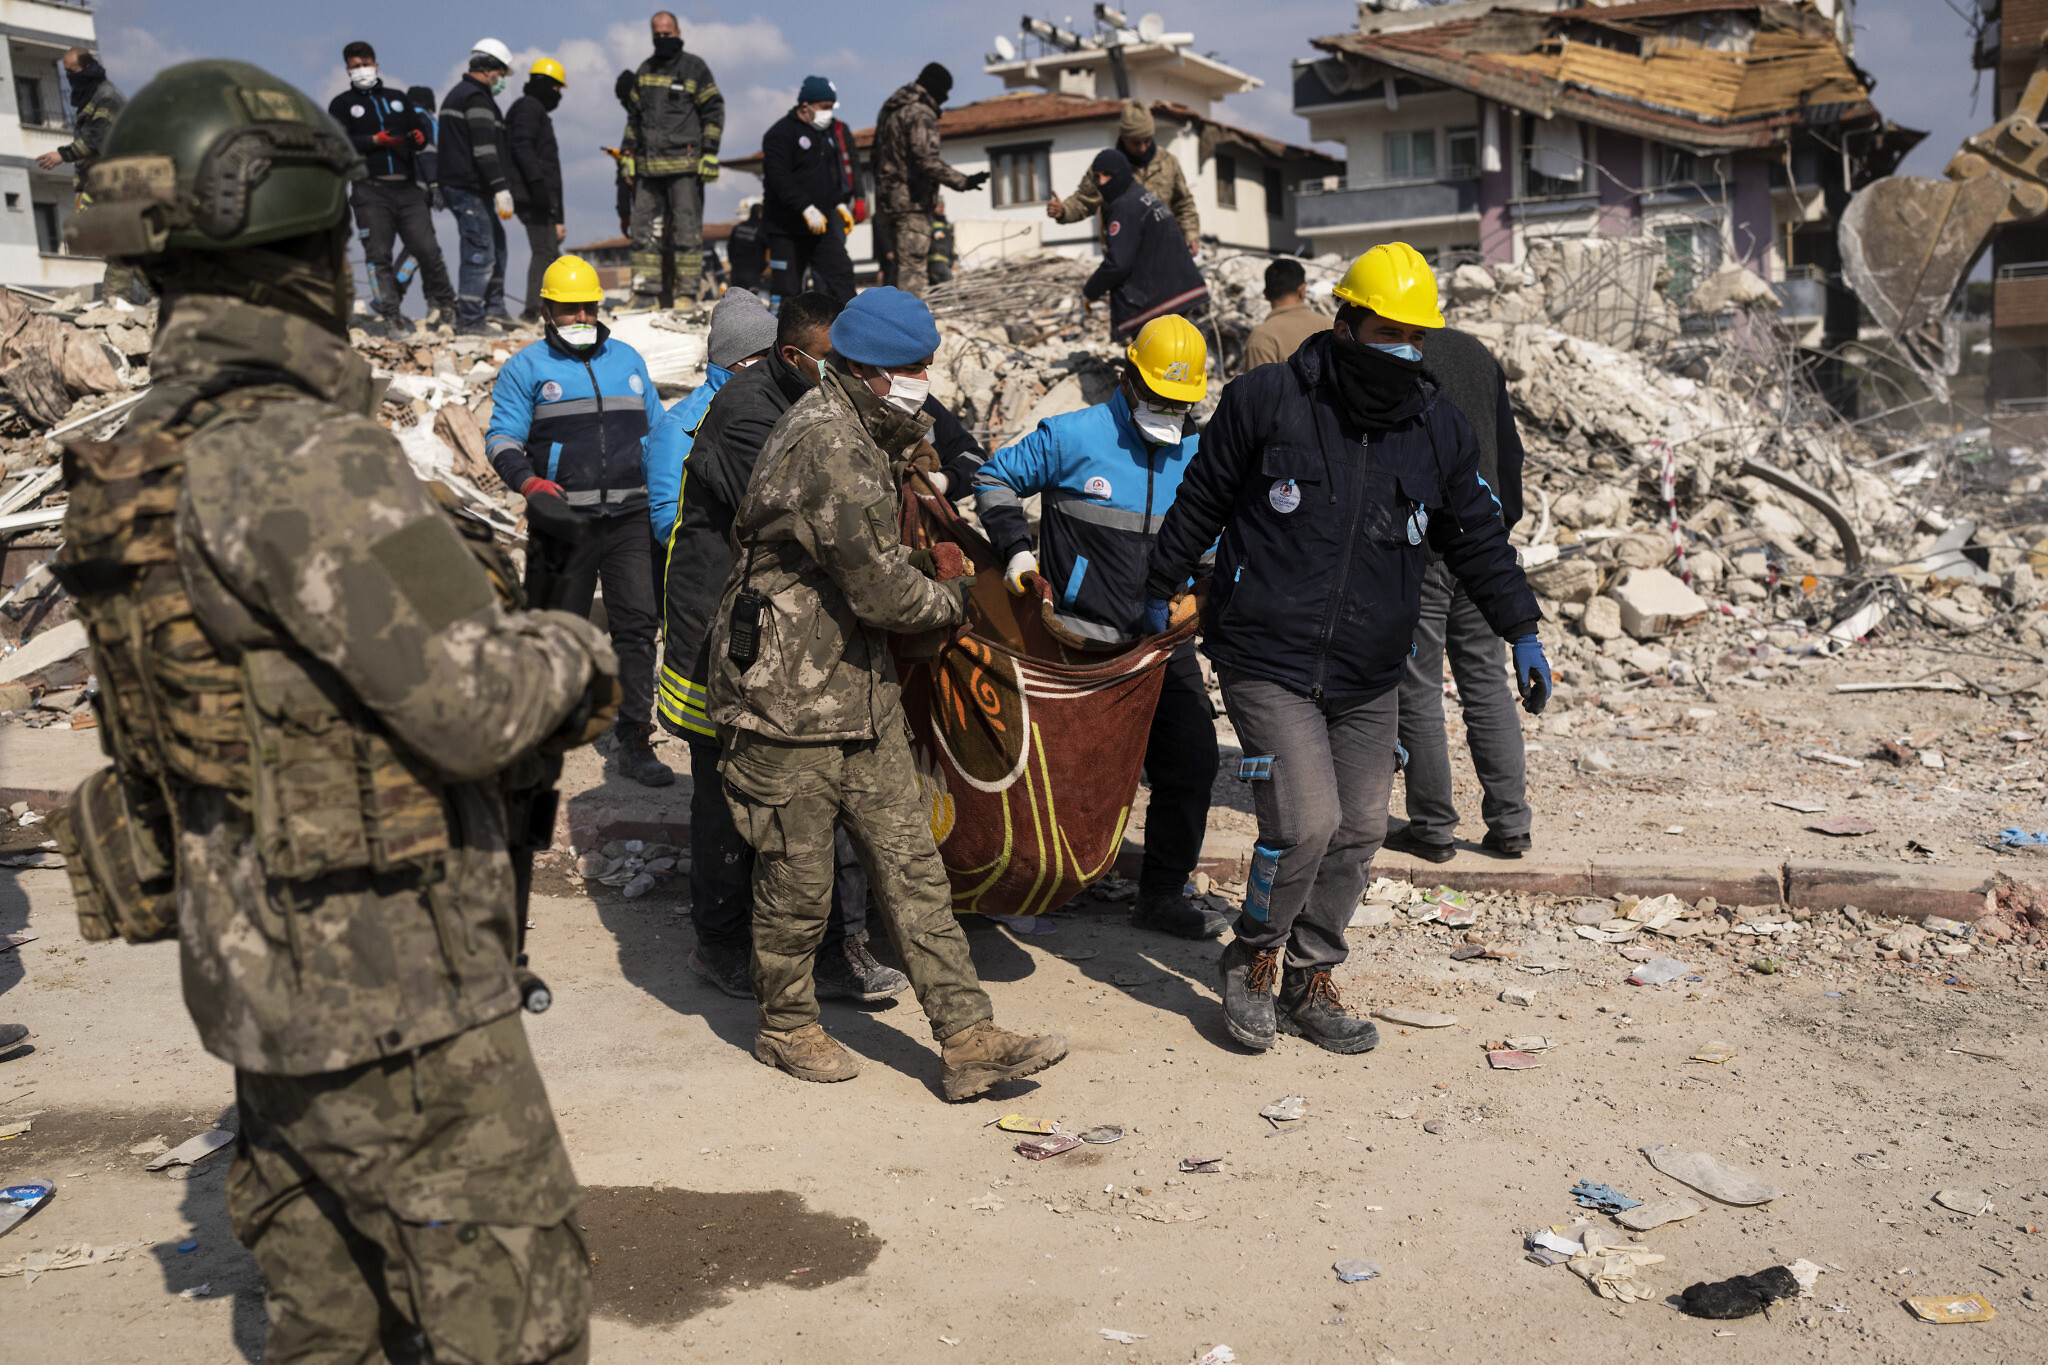 Crisis chic: American Red Cross responds to Turkey earthquake